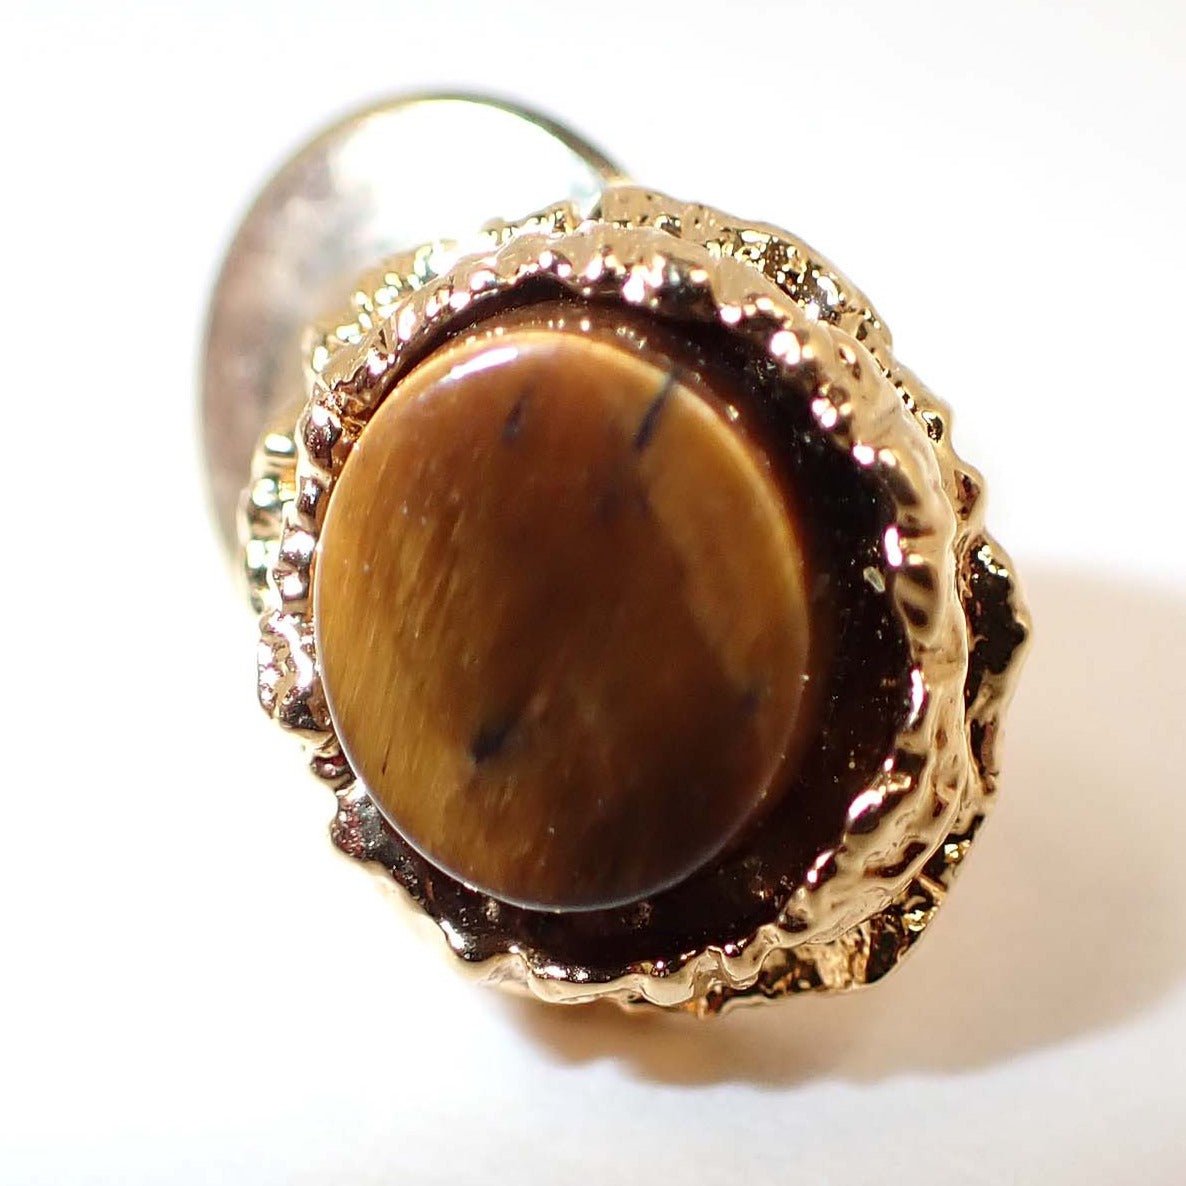 Front view of the Mid Century vintage Brutalist style tie tack. The metal is gold tone in color. There is a flat round tiger's eye gemstone cab in the middle. The surrounding setting has a free form bumpy textured style look. 